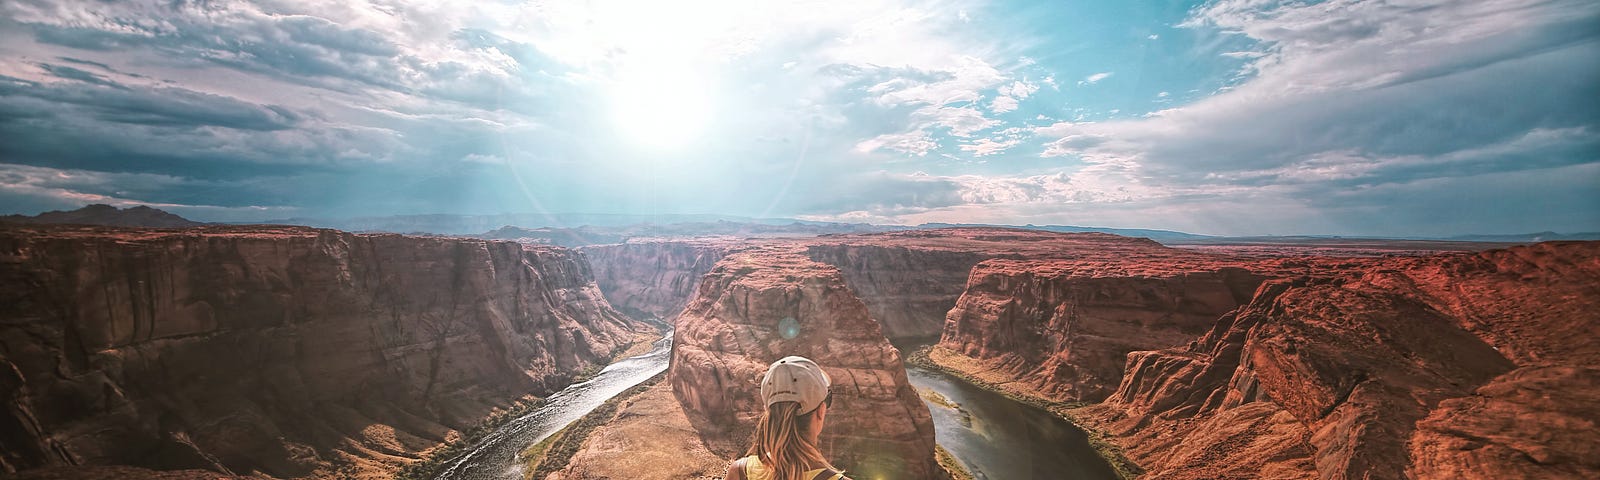 Woman looking out over canyon admiring the view with water below and the sun shining brightly overhead.